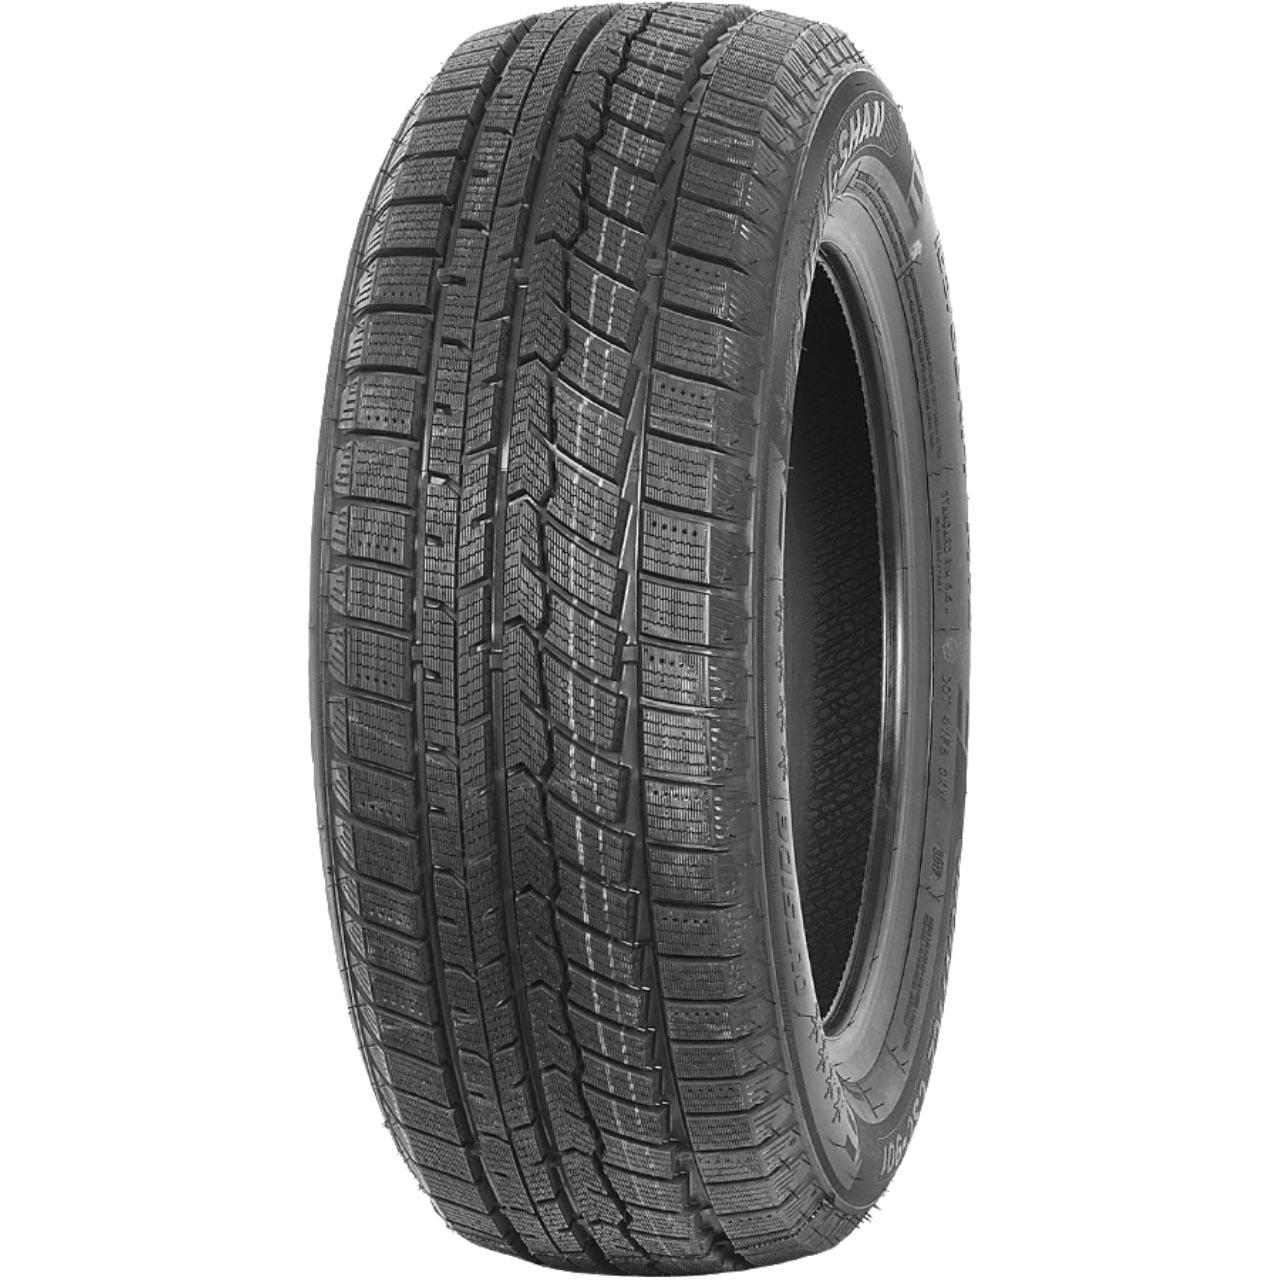 CHENGSHAN MONTICE CSC-901 155/65R14 75T BSW